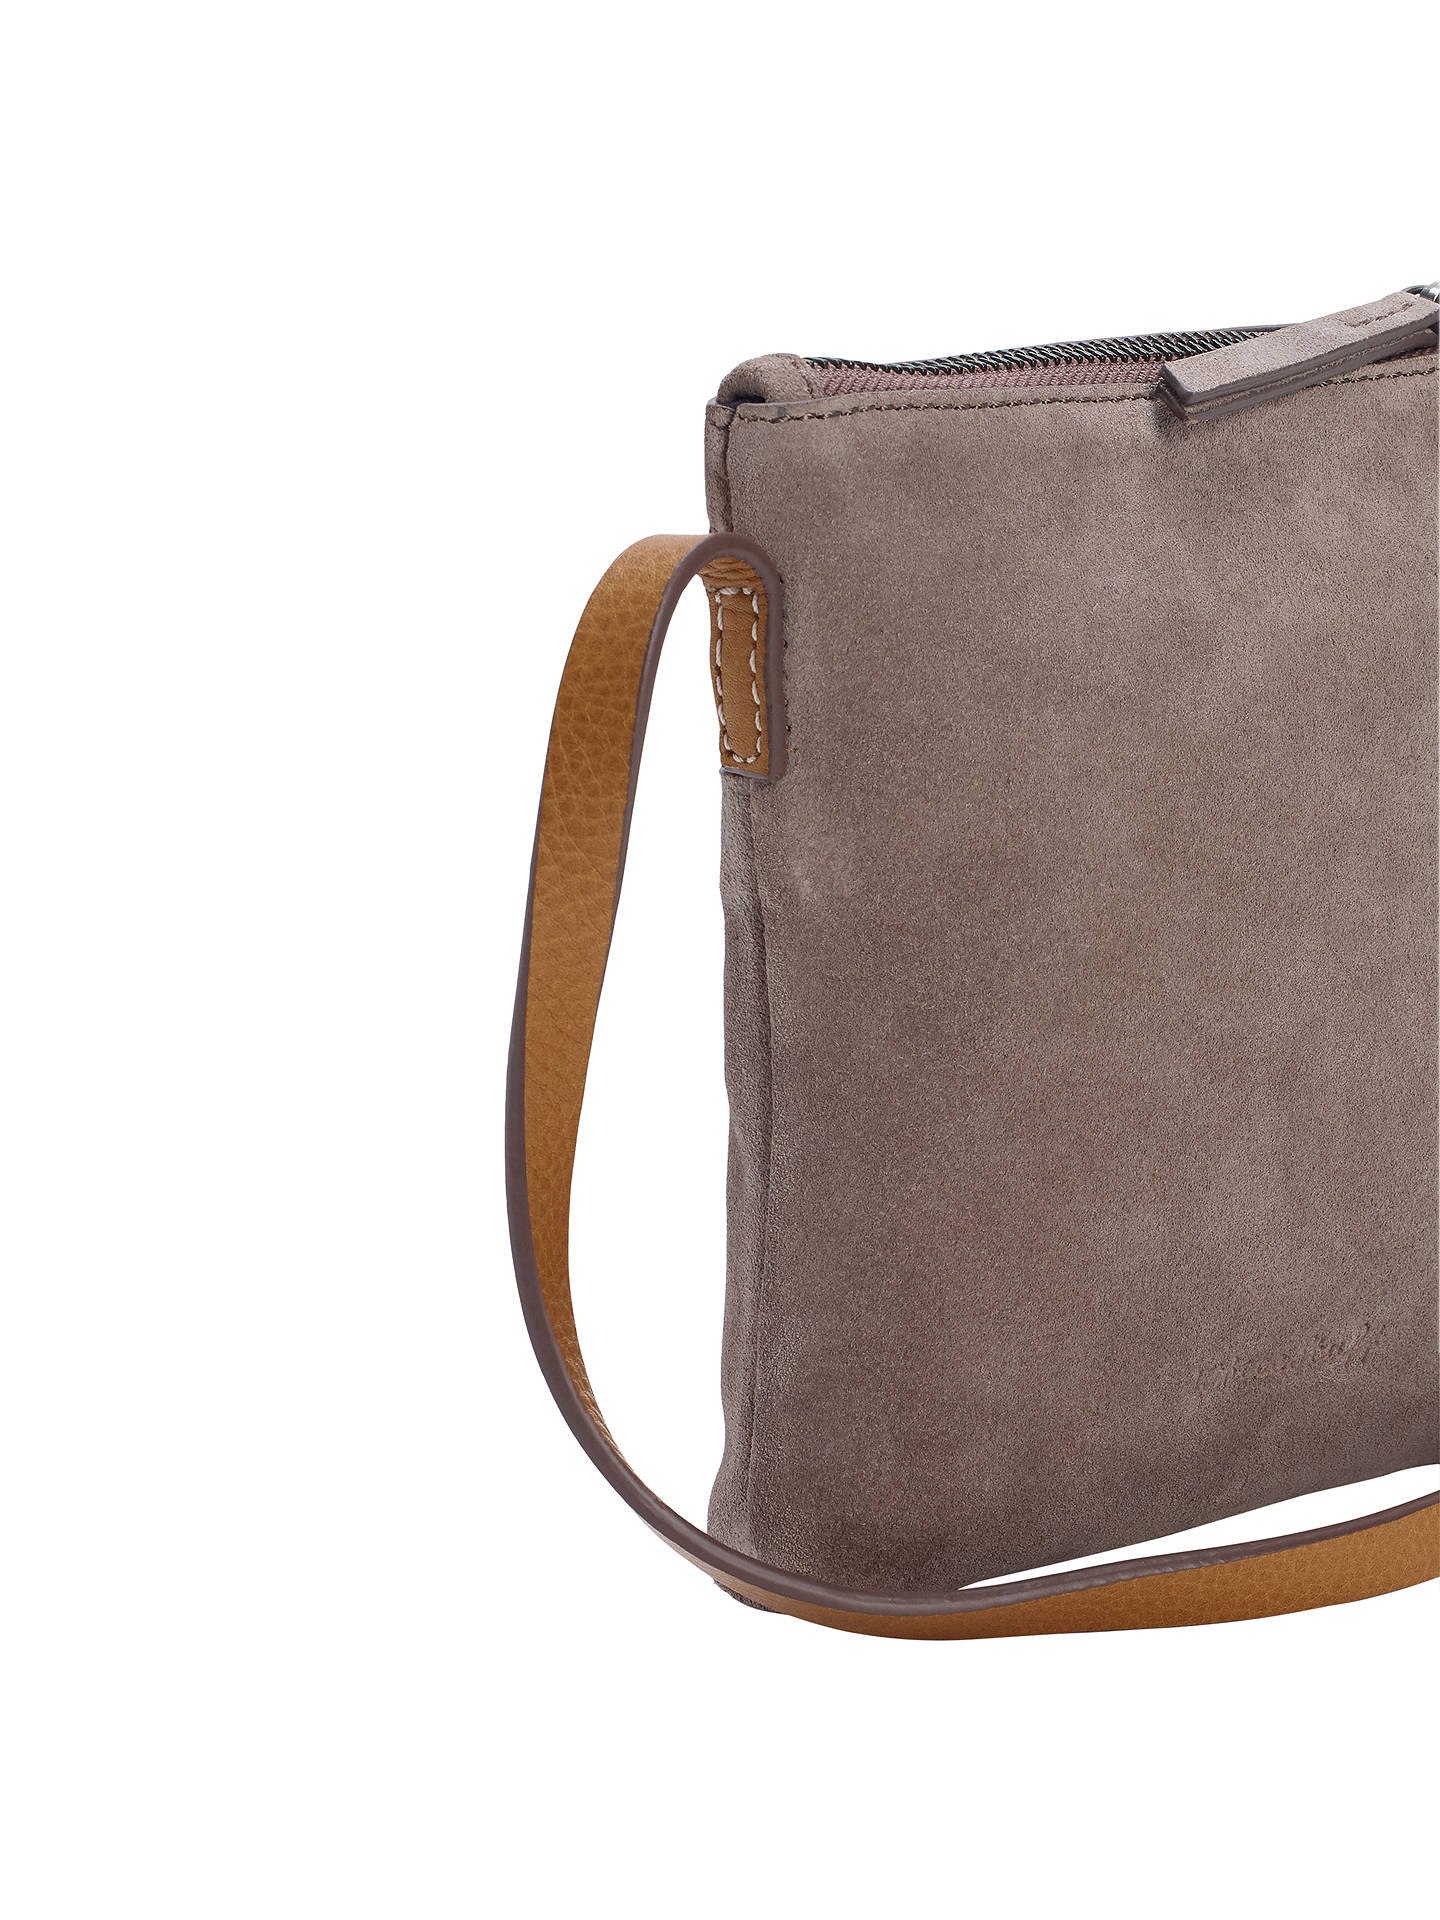 White Stuff Suede Cross Body Bag, Taupe at John Lewis & Partners